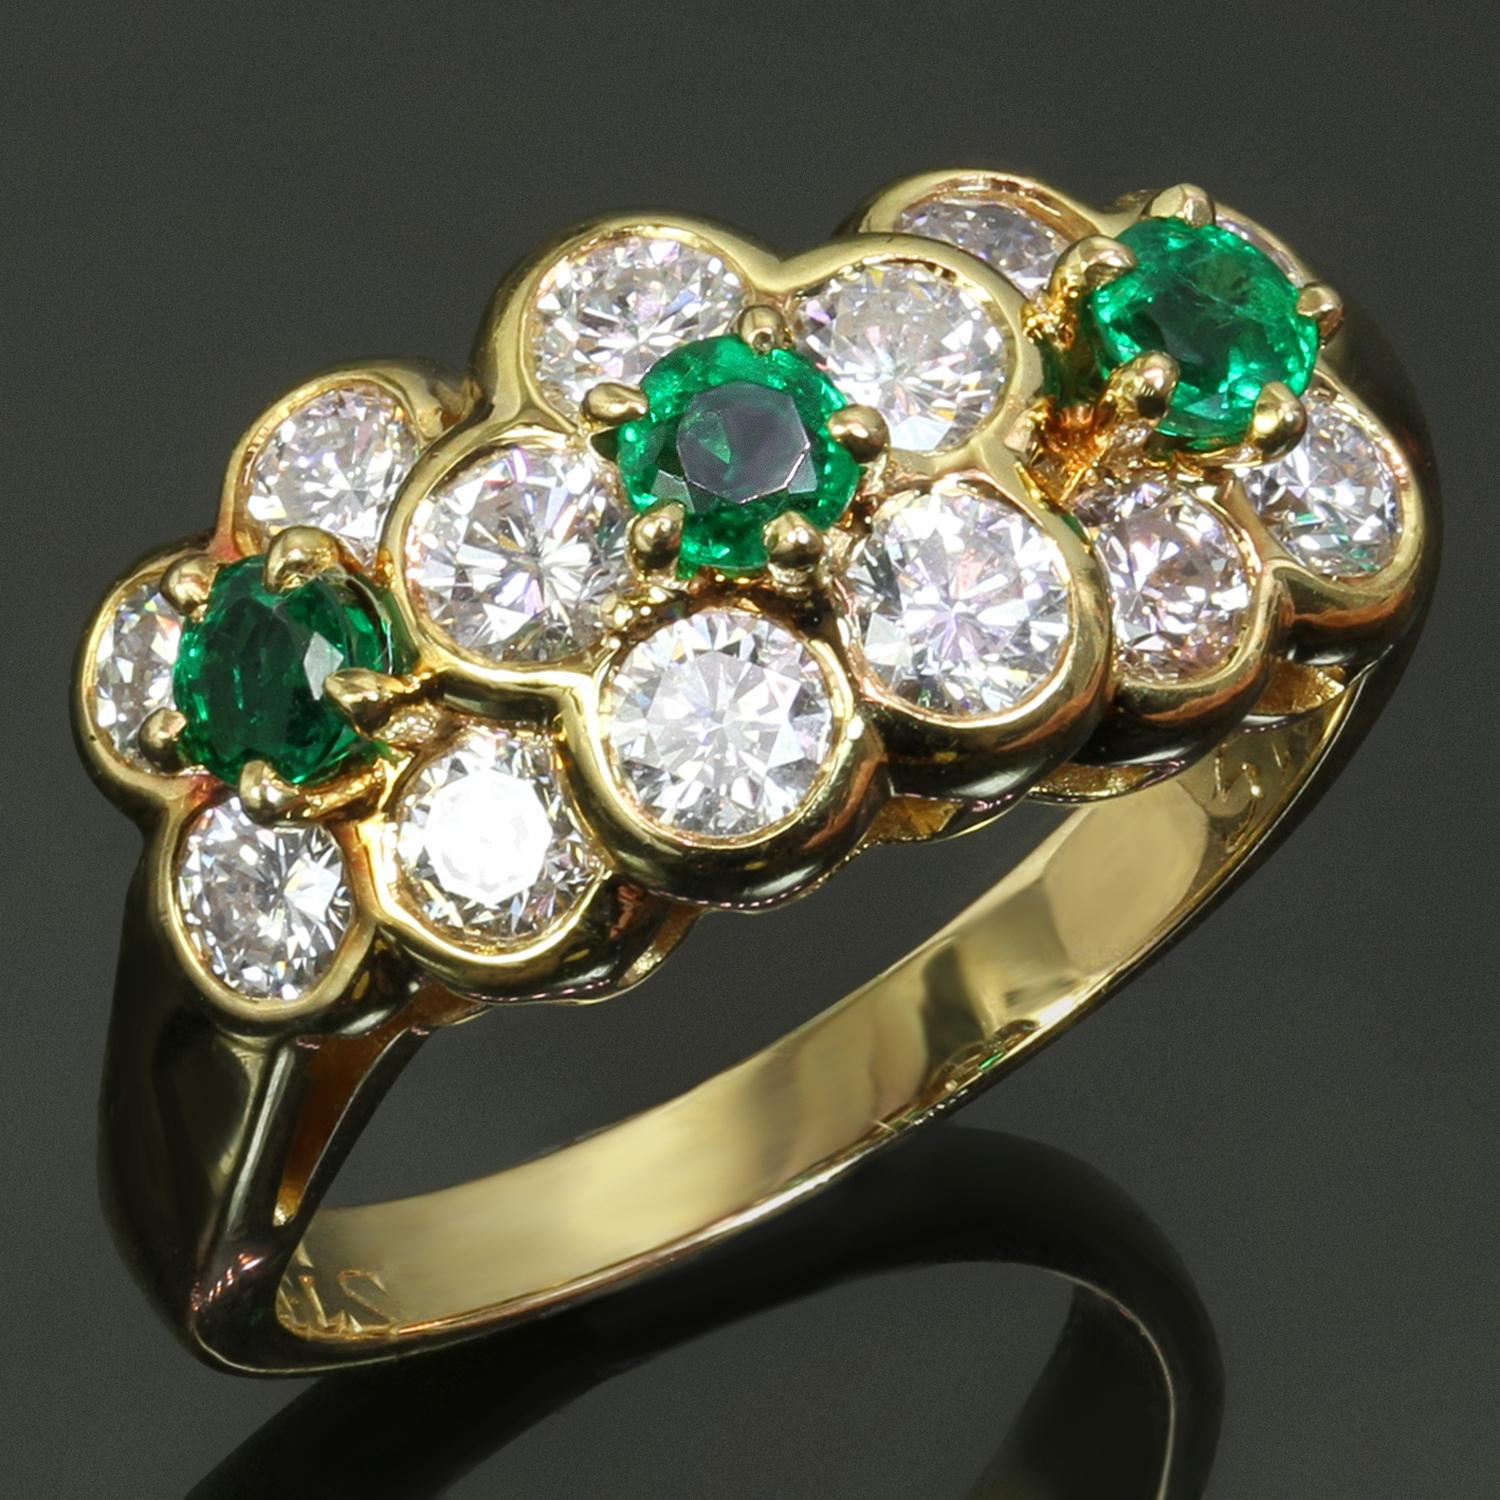 This exquisite Van Cleef & Arpels ring from the classic Fleurette collection is crafted in 18k yellow gold and set with green emeralds weighing an estimated 0.30 carats and brilliant-cut round D-F VVS1-VVS2 diamonds weighing an estimated 1.05